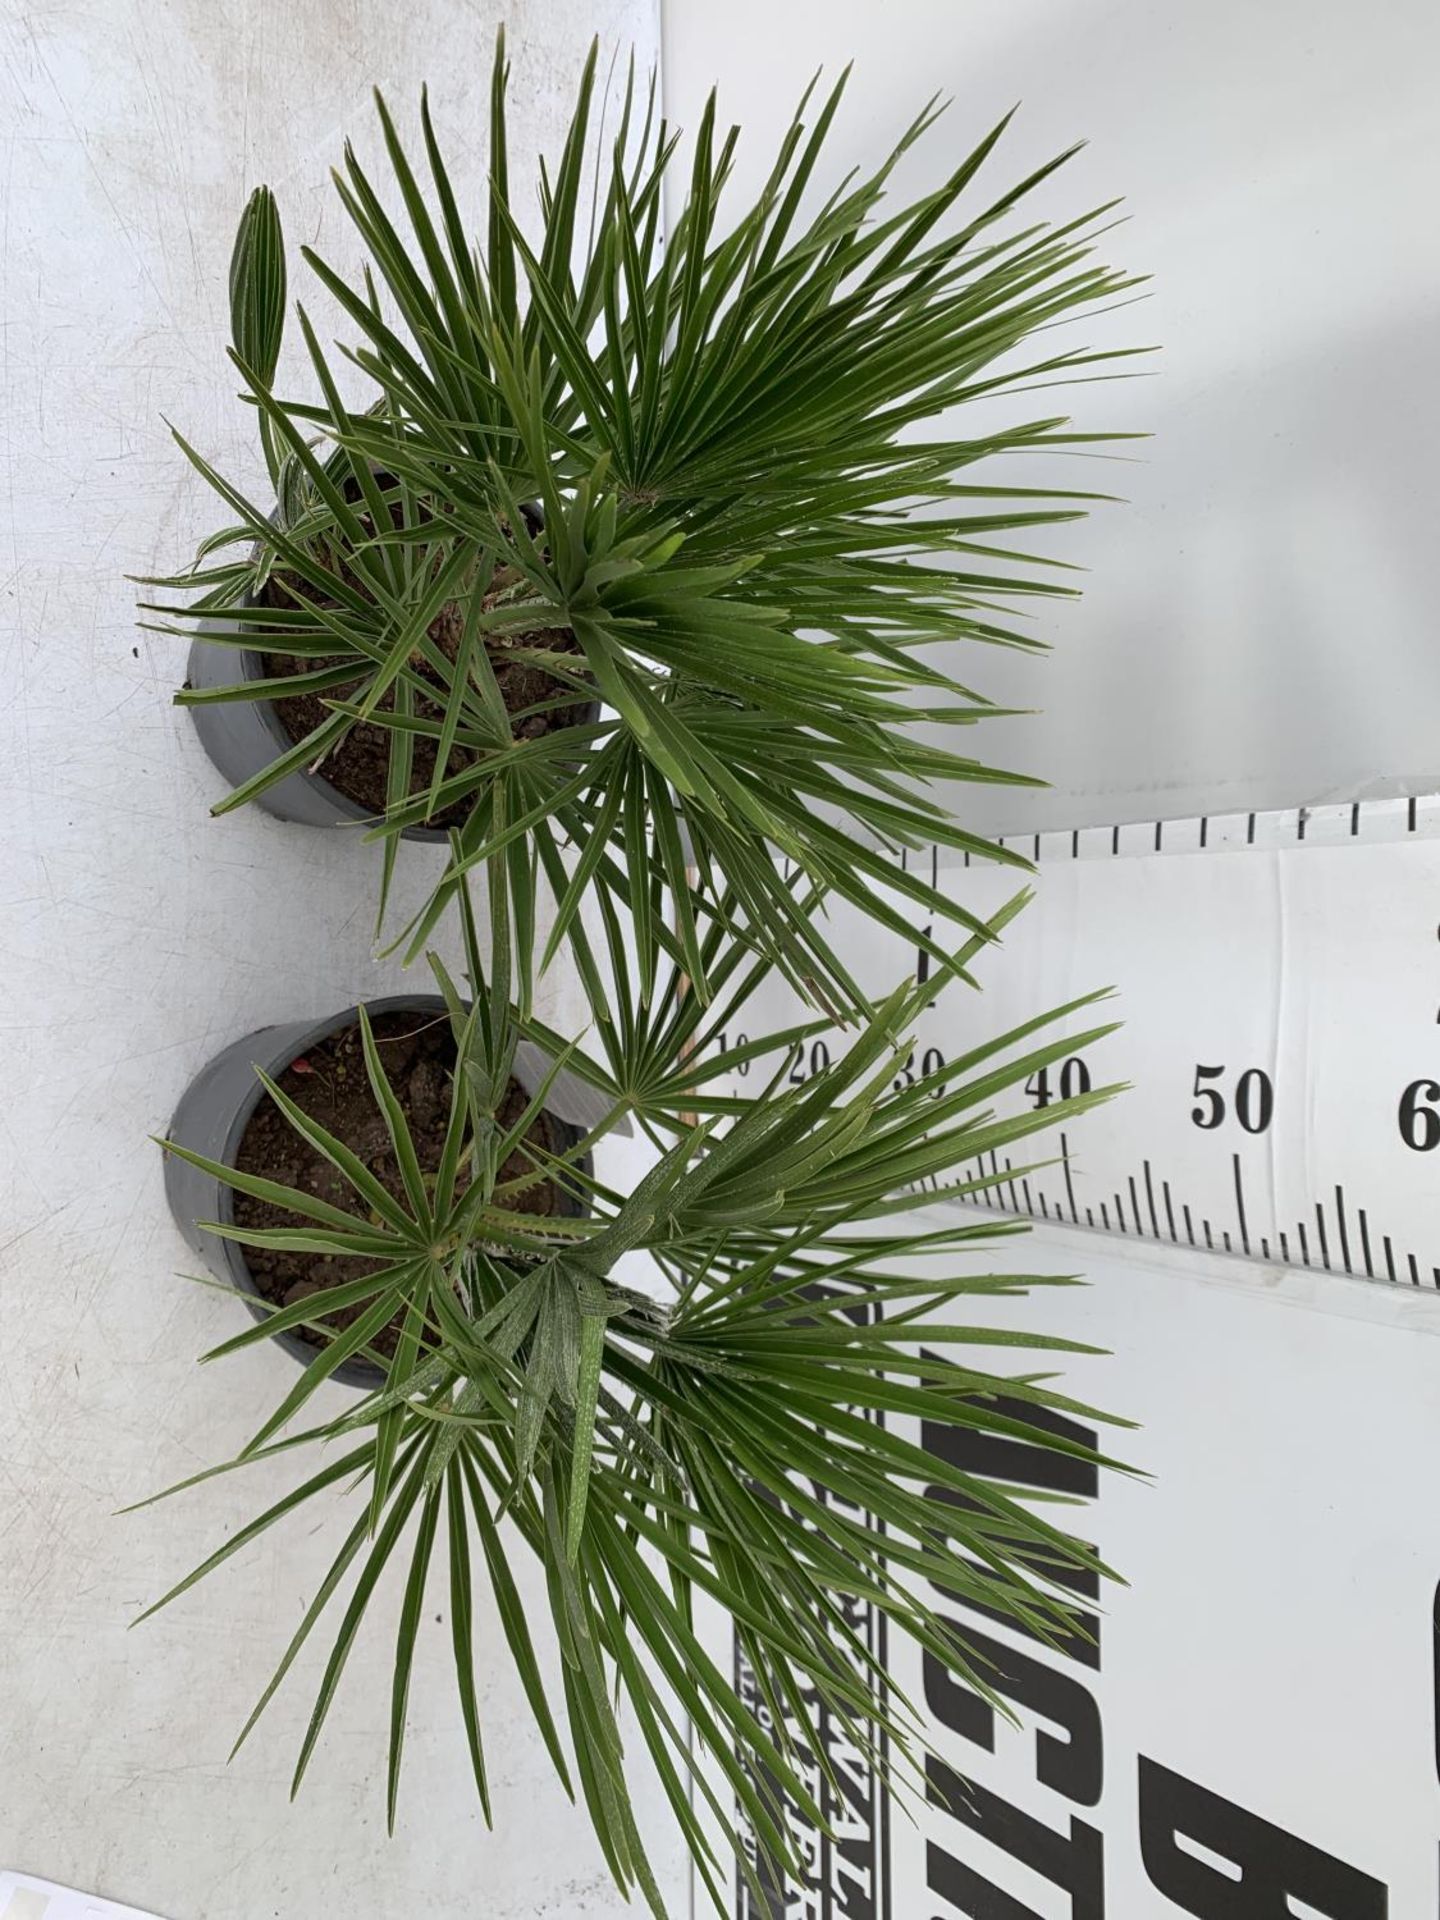 TWO CHAMAEROPS HUMILIS HARDY IN 3 LTR POTS APPROX 60CM IN HEIGHT PLUS VAT TO BE SOLD FOR THE TWO - Image 2 of 5